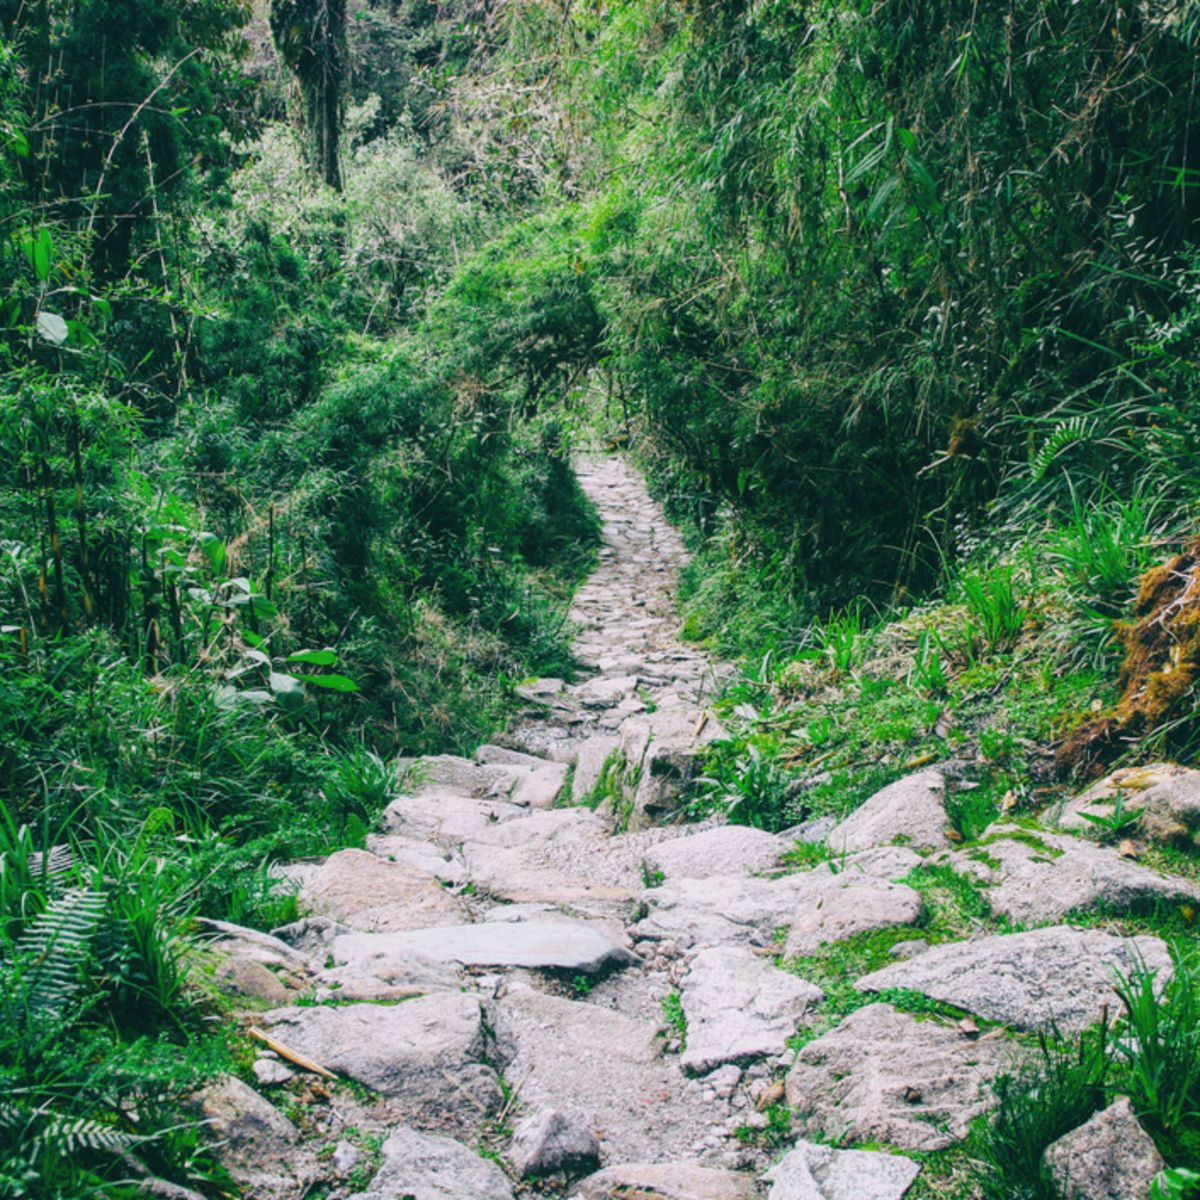 Stones of Inca Trail path with lush vegetation crowding in on side, Peru
